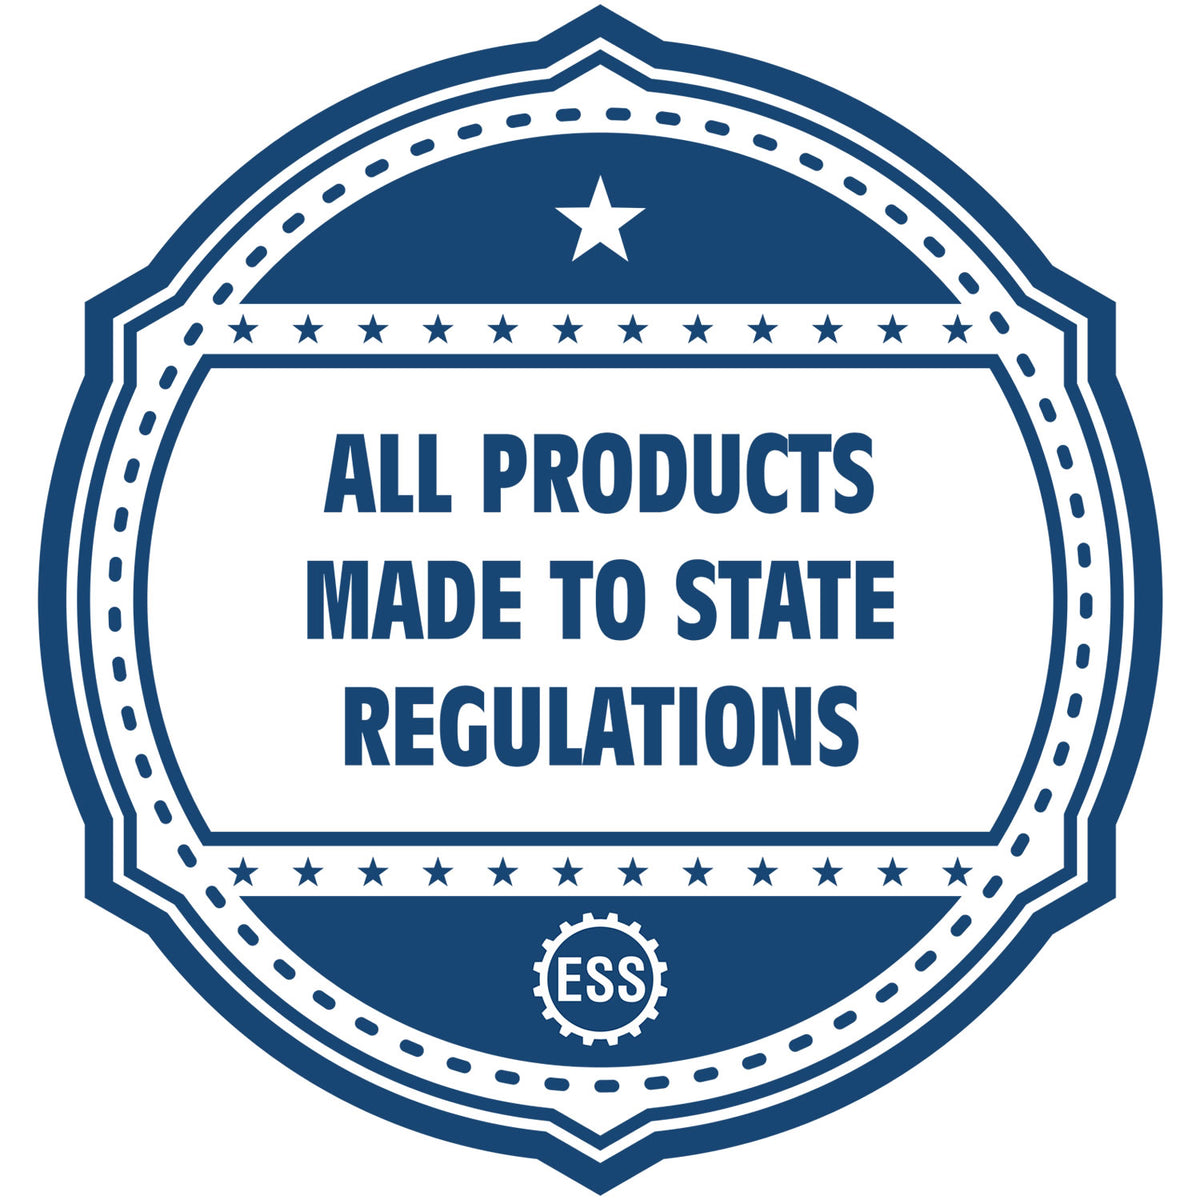 An icon or badge element for the State of New Hampshire Architectural Seal Embosser showing that this product is made in compliance with state regulations.